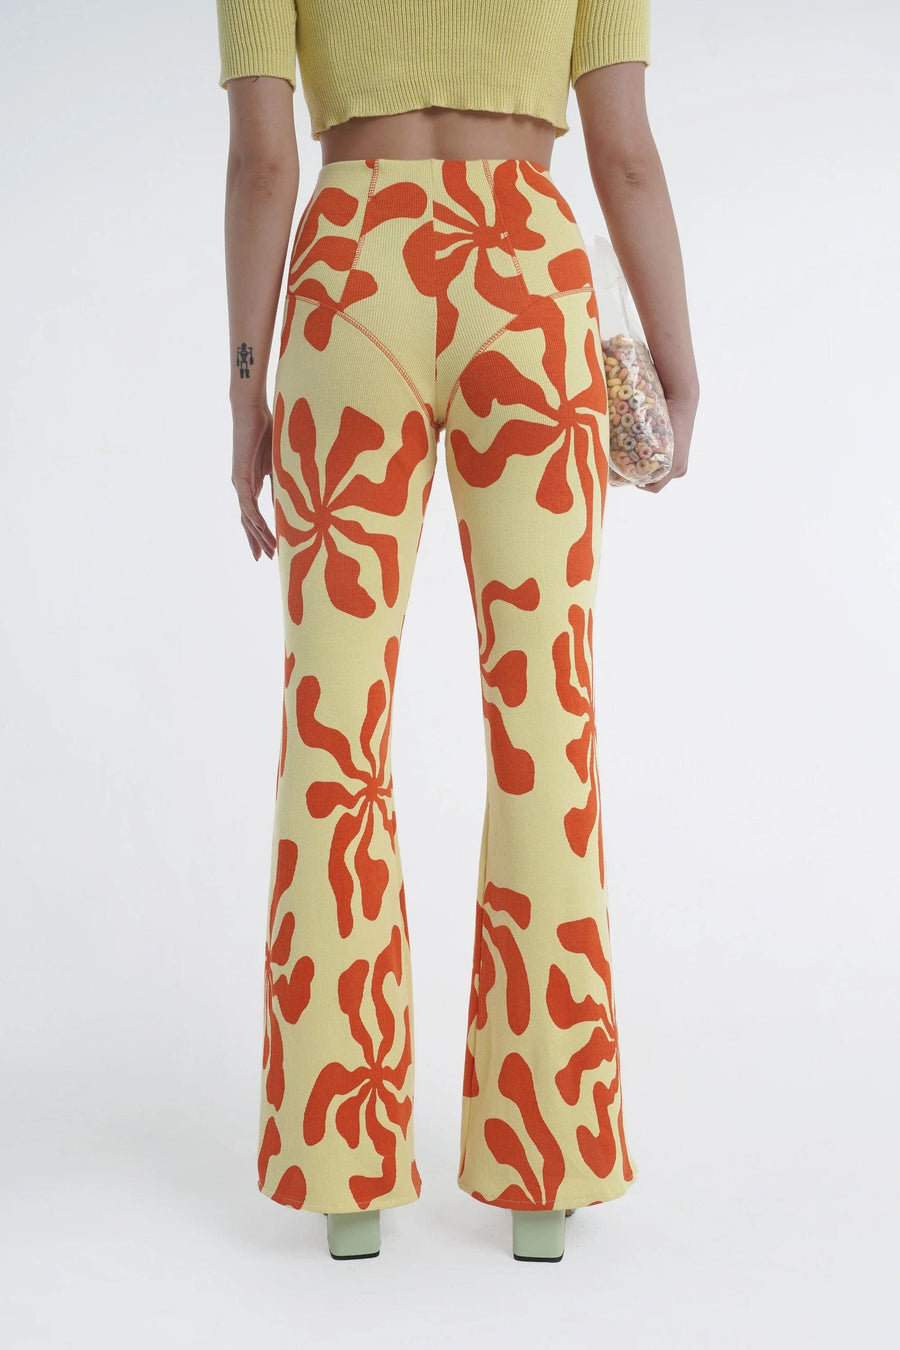 Tequila Sunrise Trousers